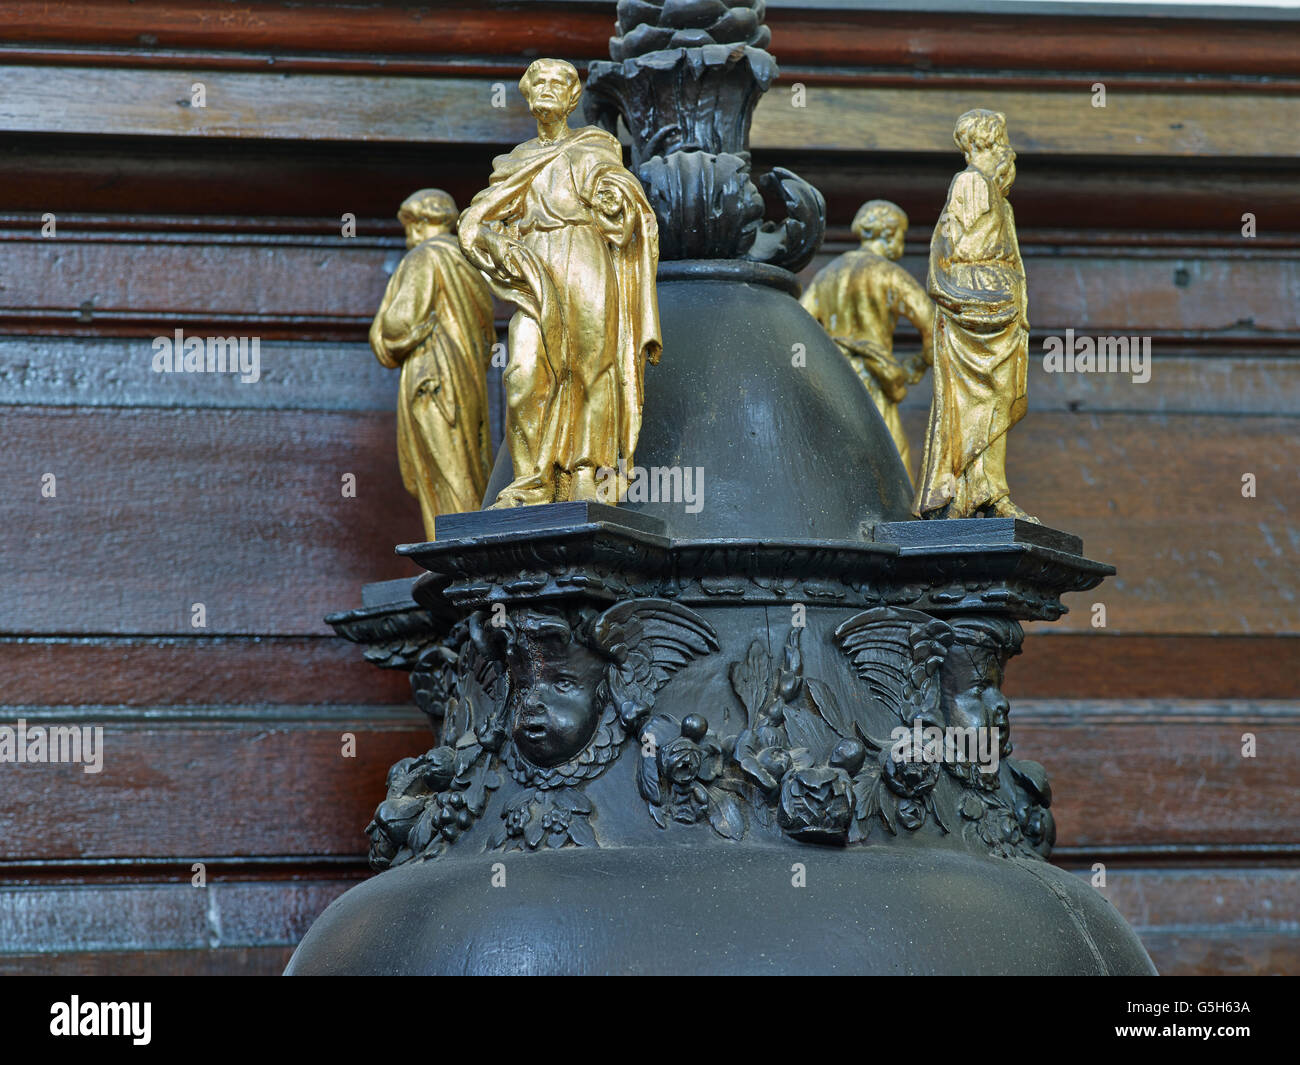 St Edmund King and Martyr, Church in the City of London. Apostles on the font cover Stock Photo